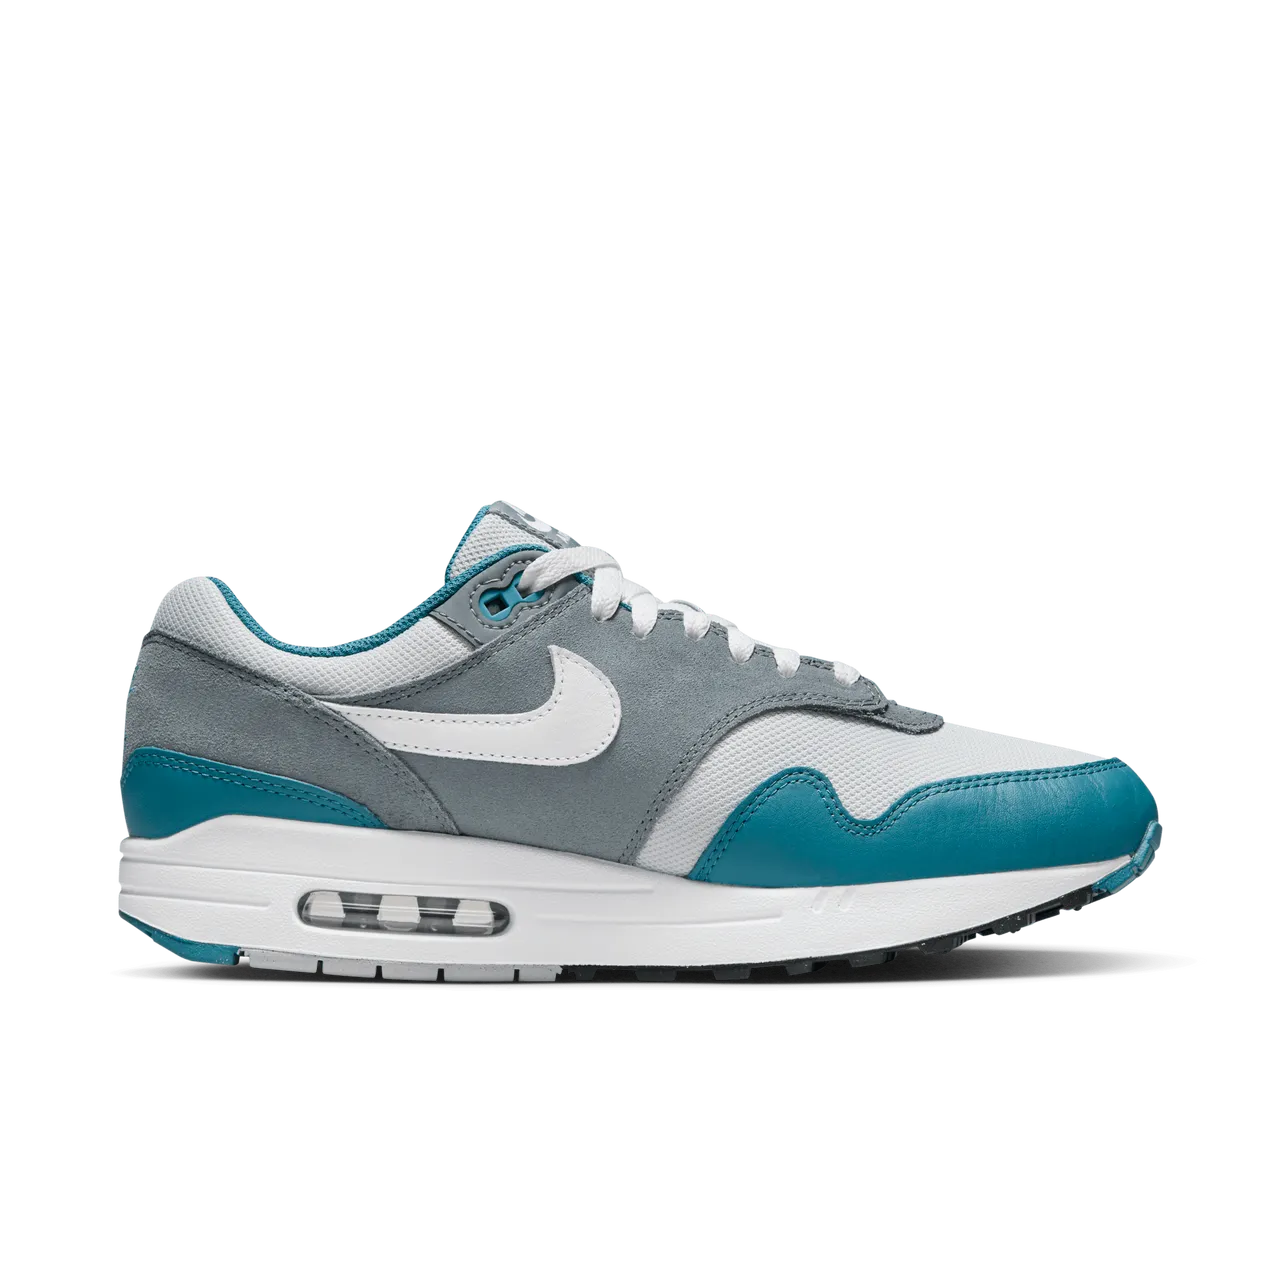 Nike Air Max 1 SC Men's Shoes - Grey - Leather